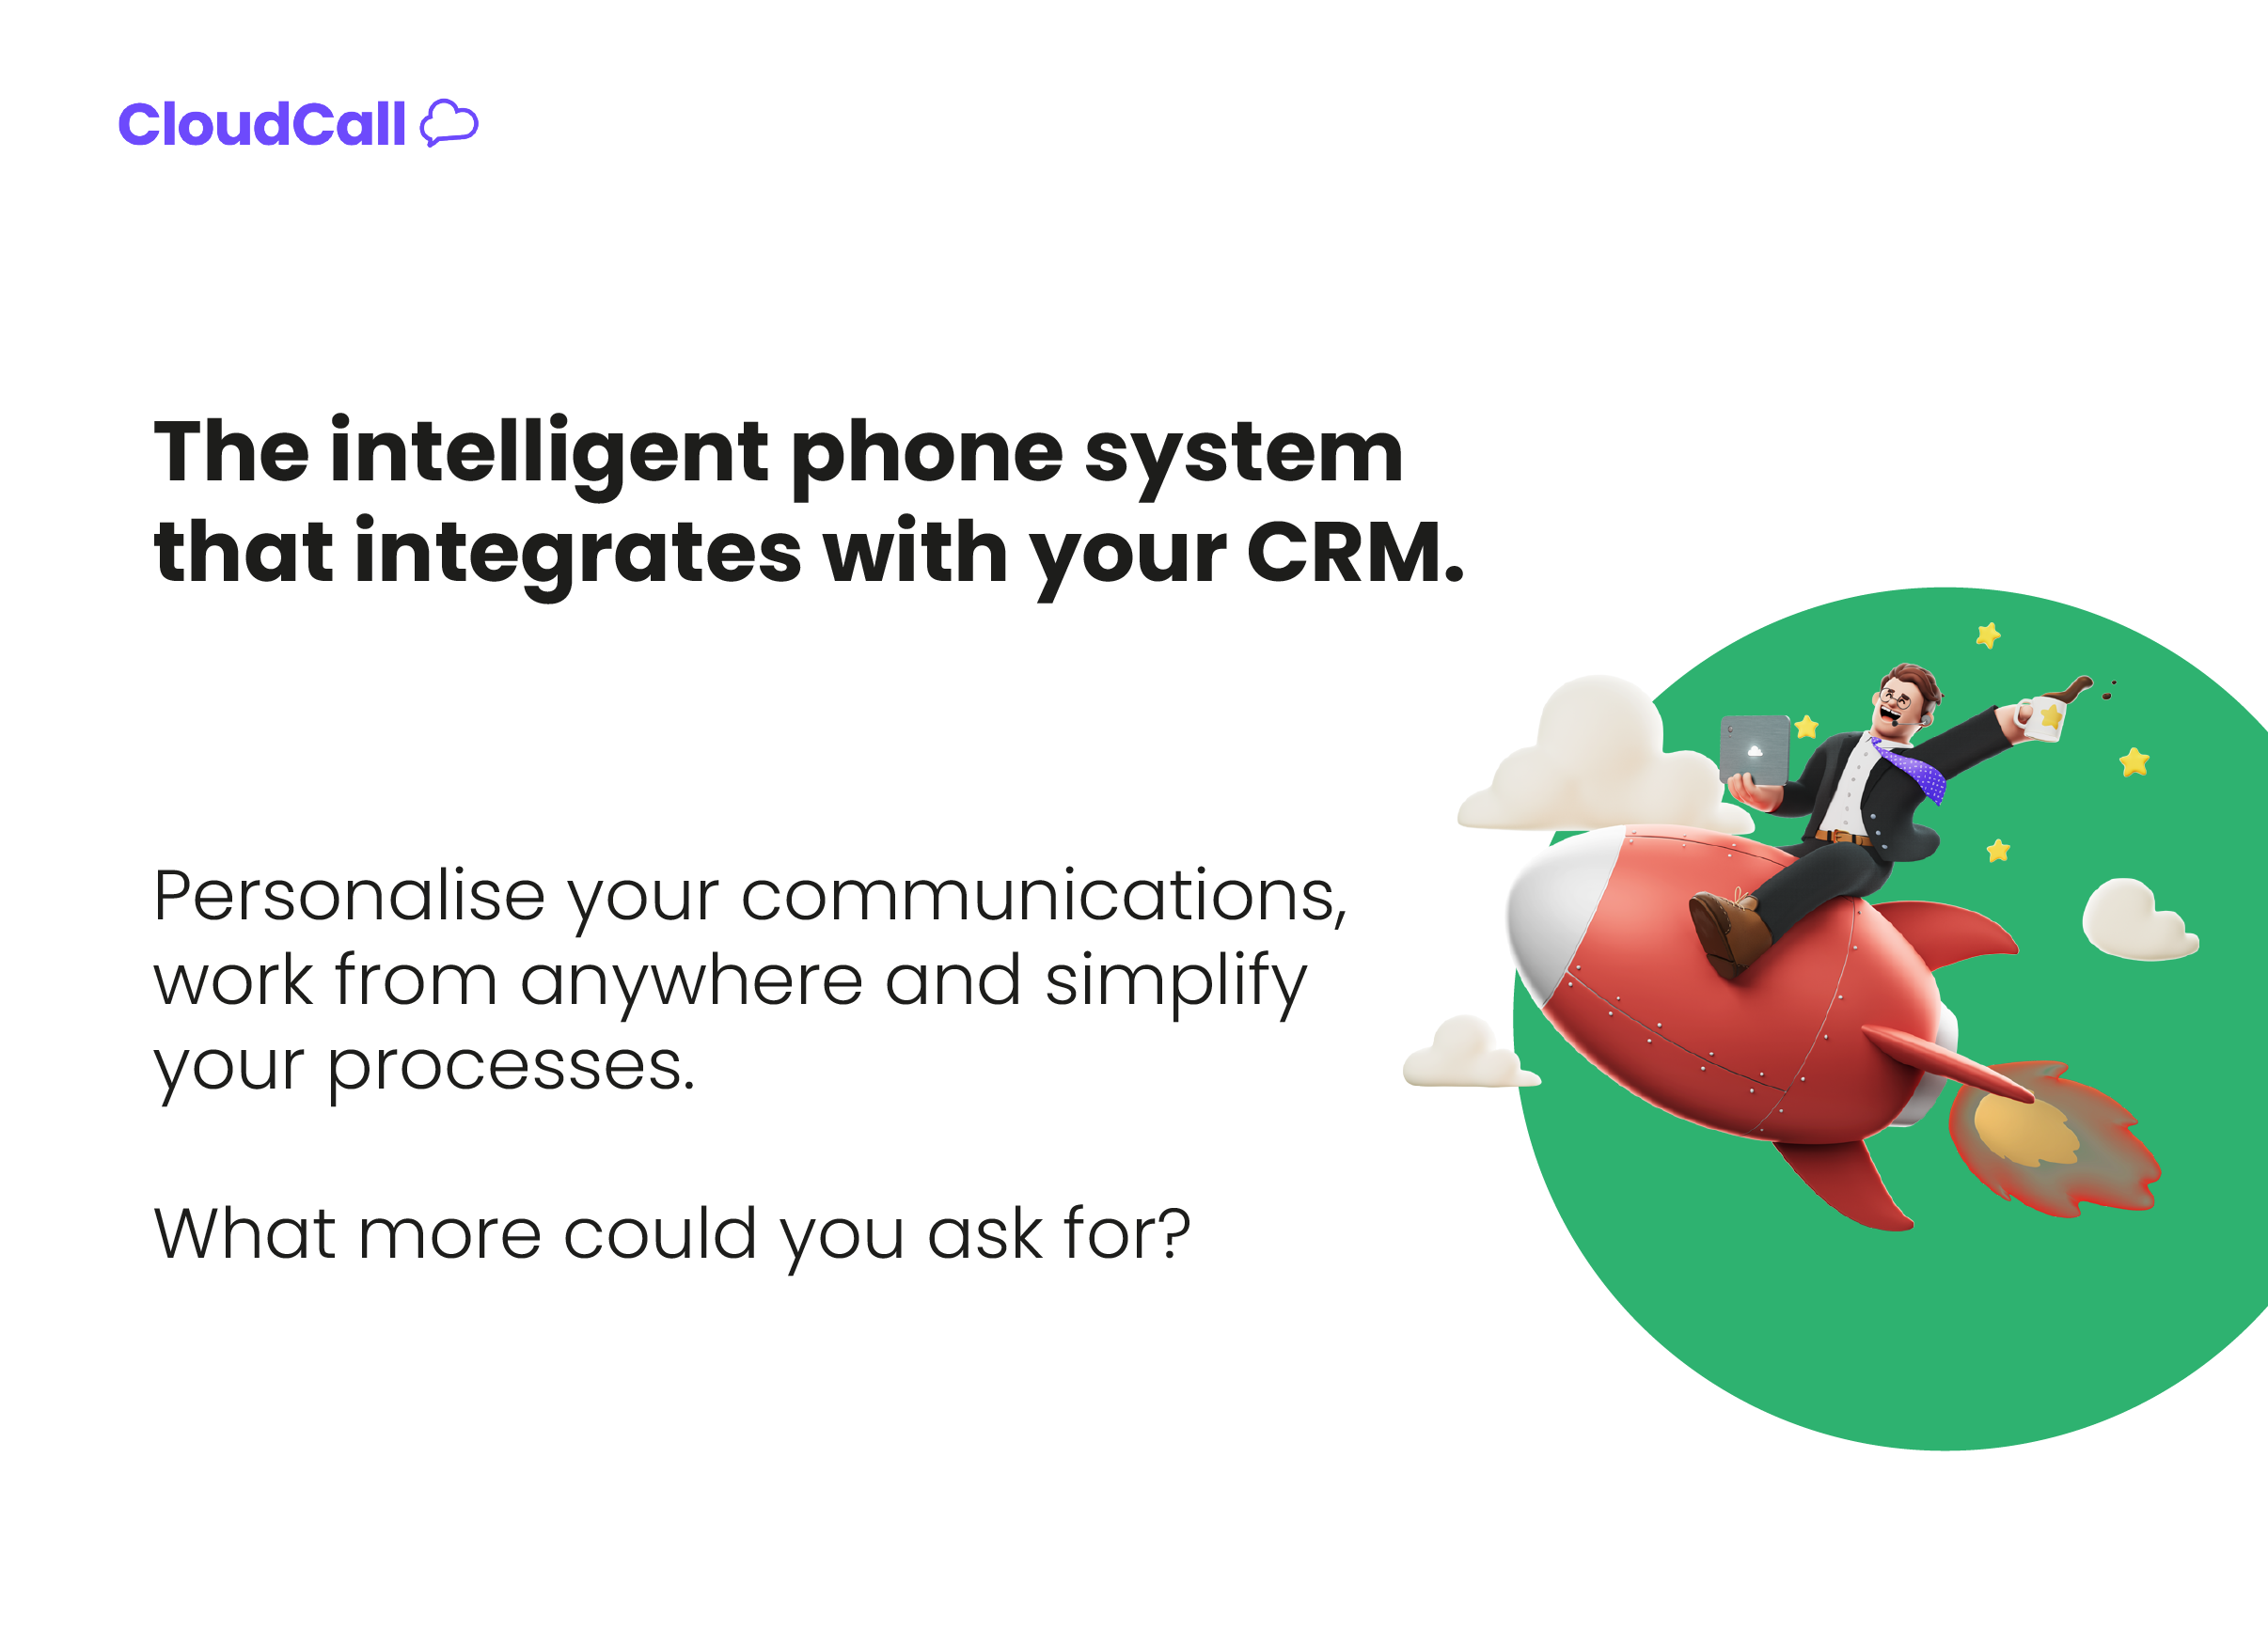 The intelligent phone system that integrated with your CRM